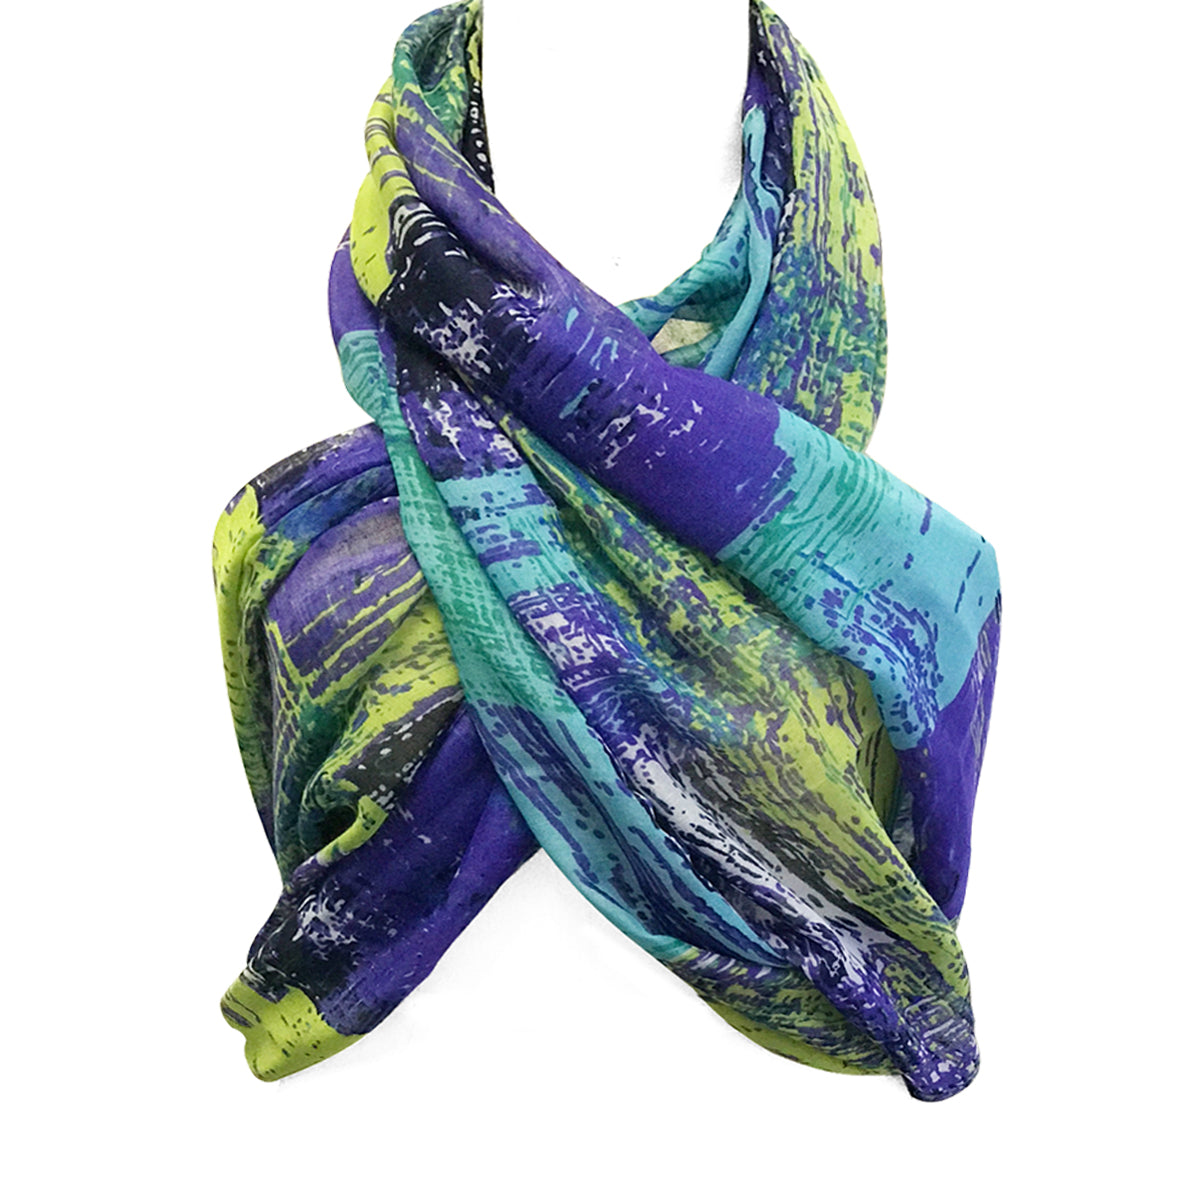 Wrapables Lightweight Infinity Scarf